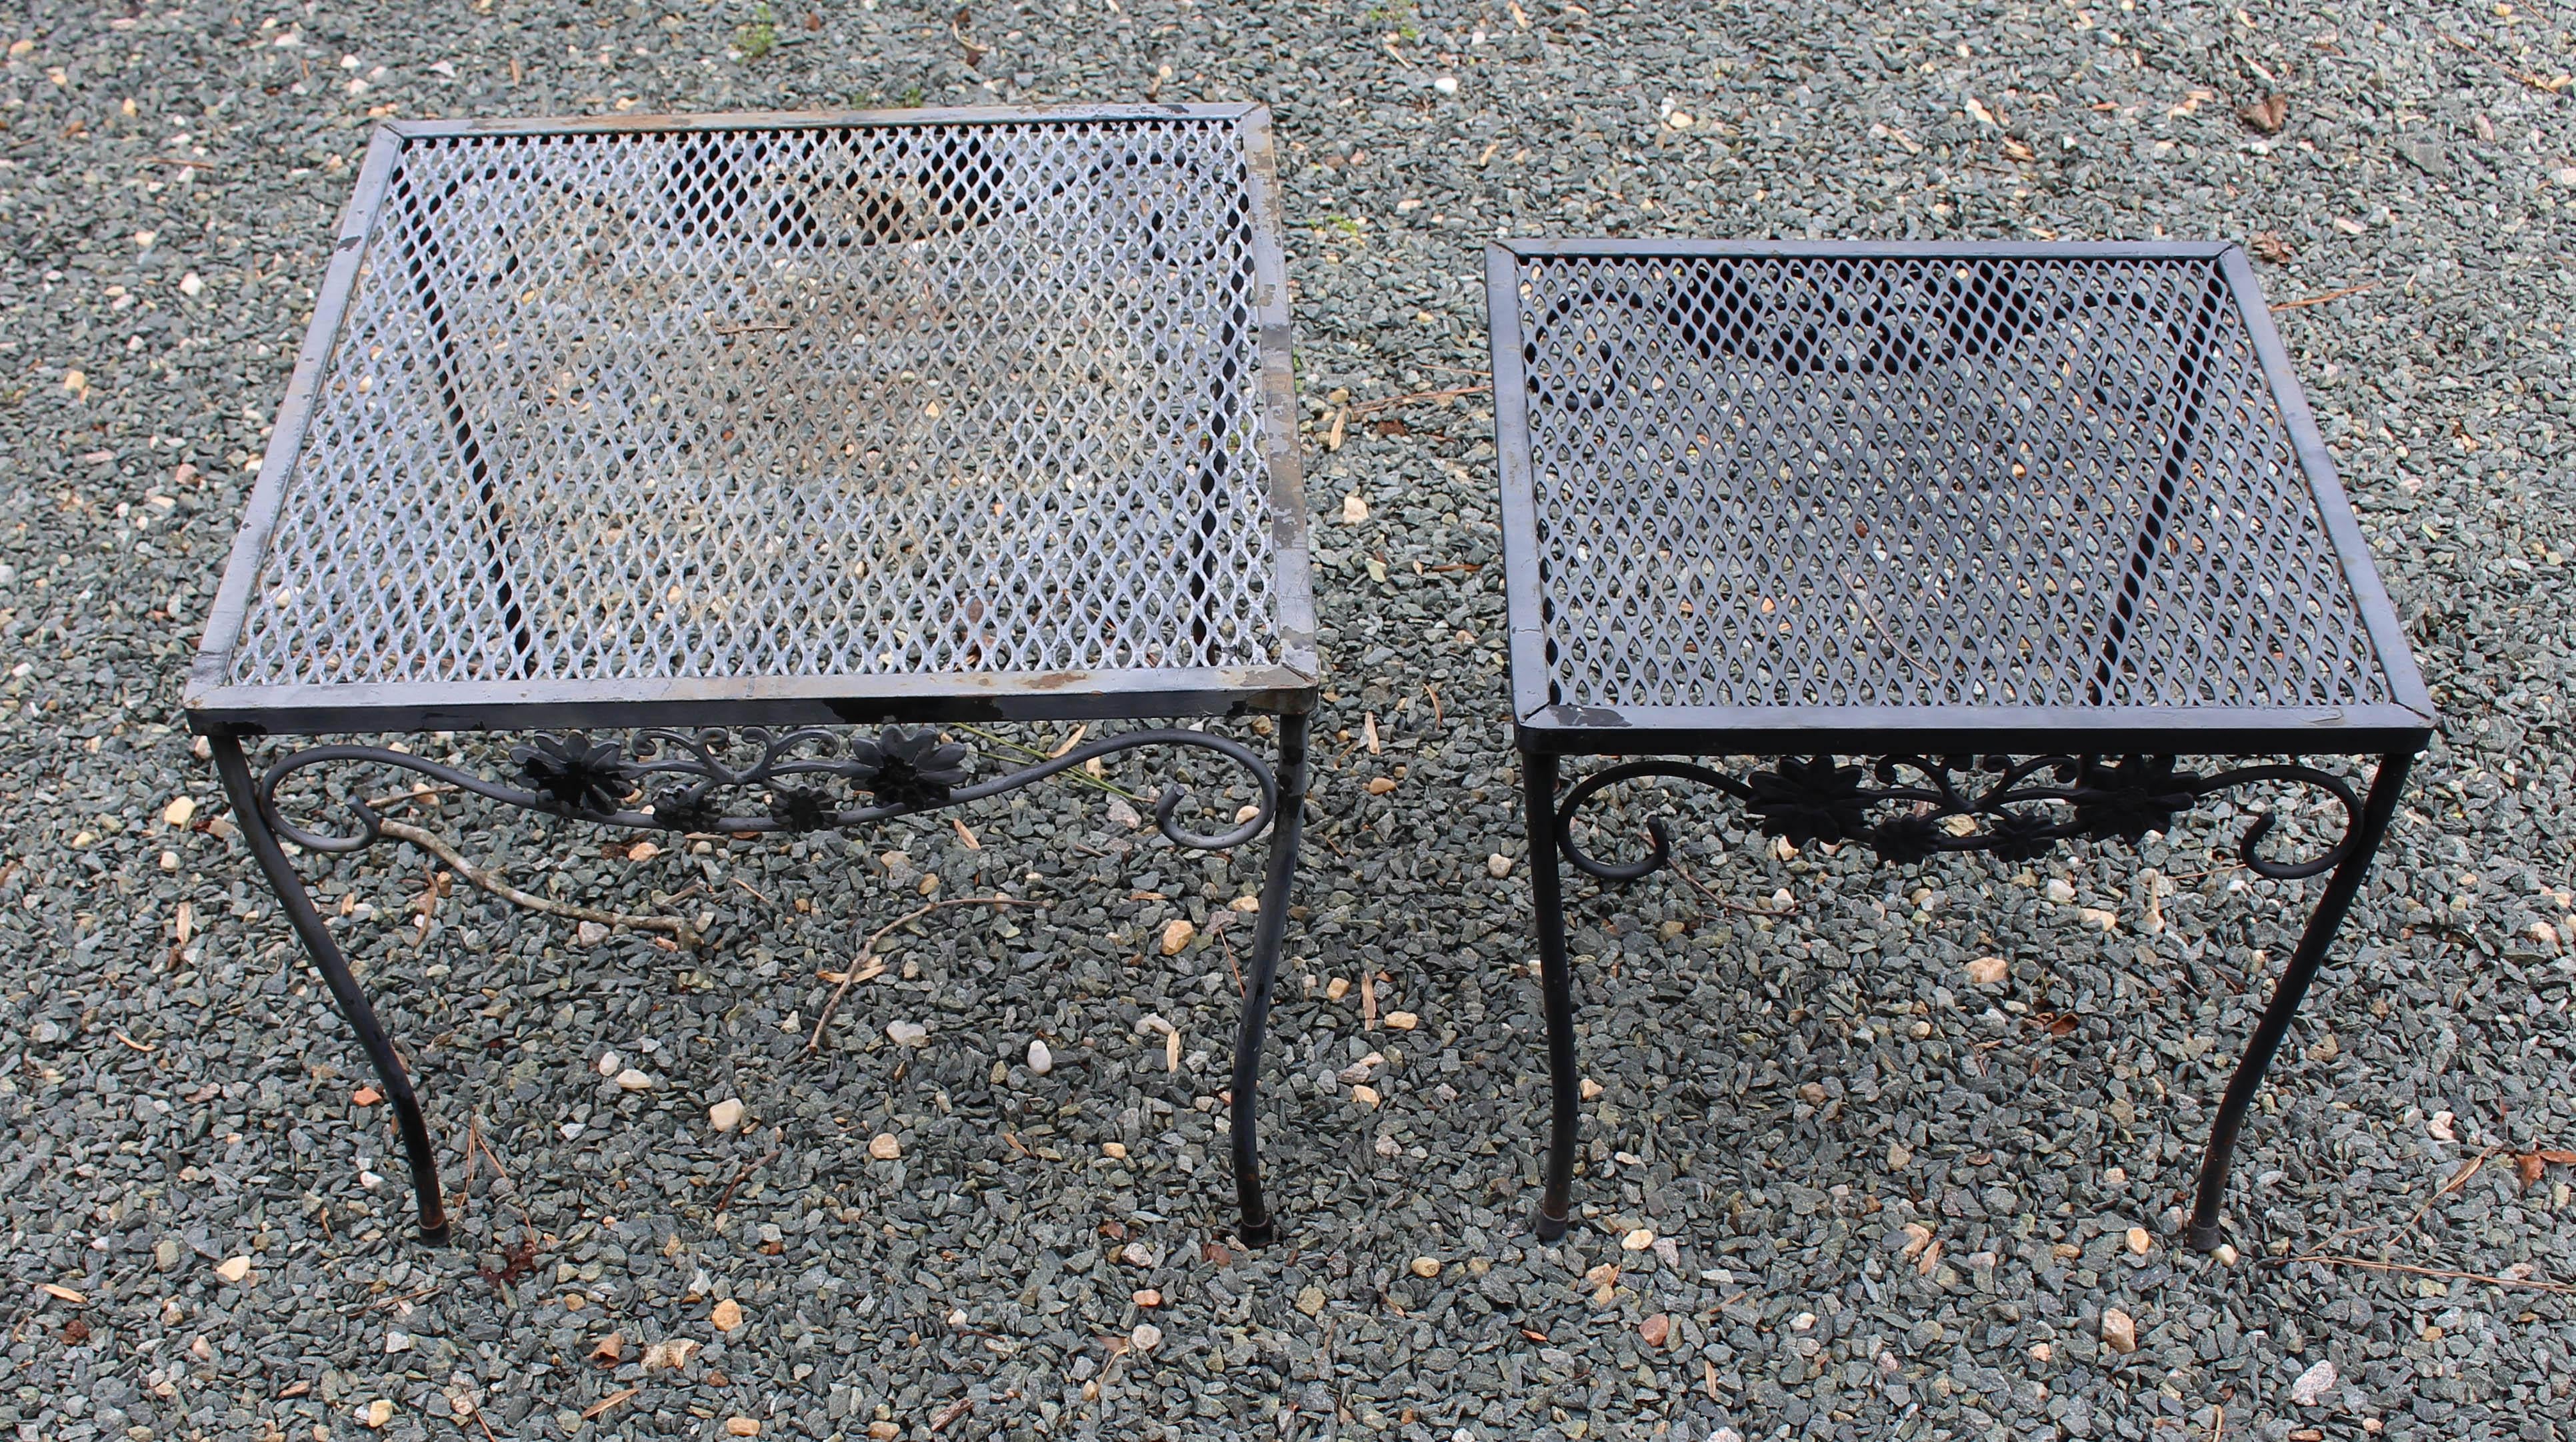 Vintage Woodard set of two outdoor nesting tables, Briarwood pattern, not labeled. One well weathered.
Larger: 19.5